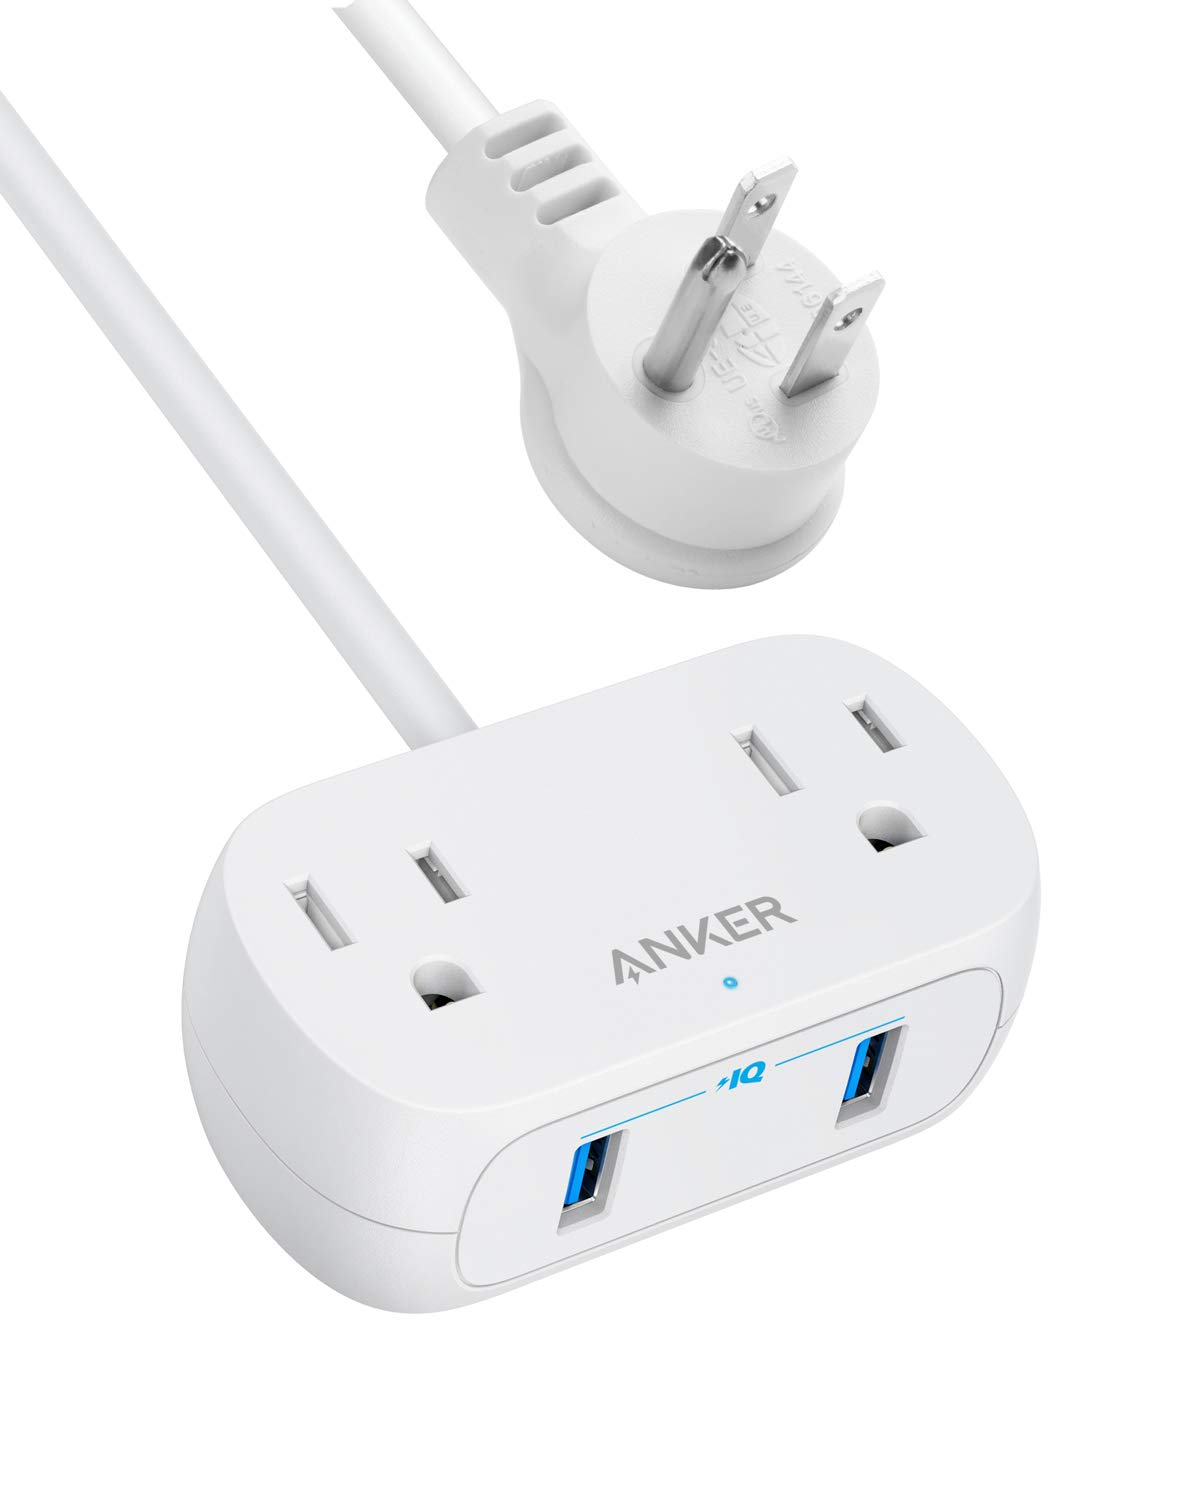 Anker Power Strip with USB PowerExtend USB 2 mini, 2 Outlets, and 2 USB Ports, Flat Plug, 5 ft Extension Cord $9.99